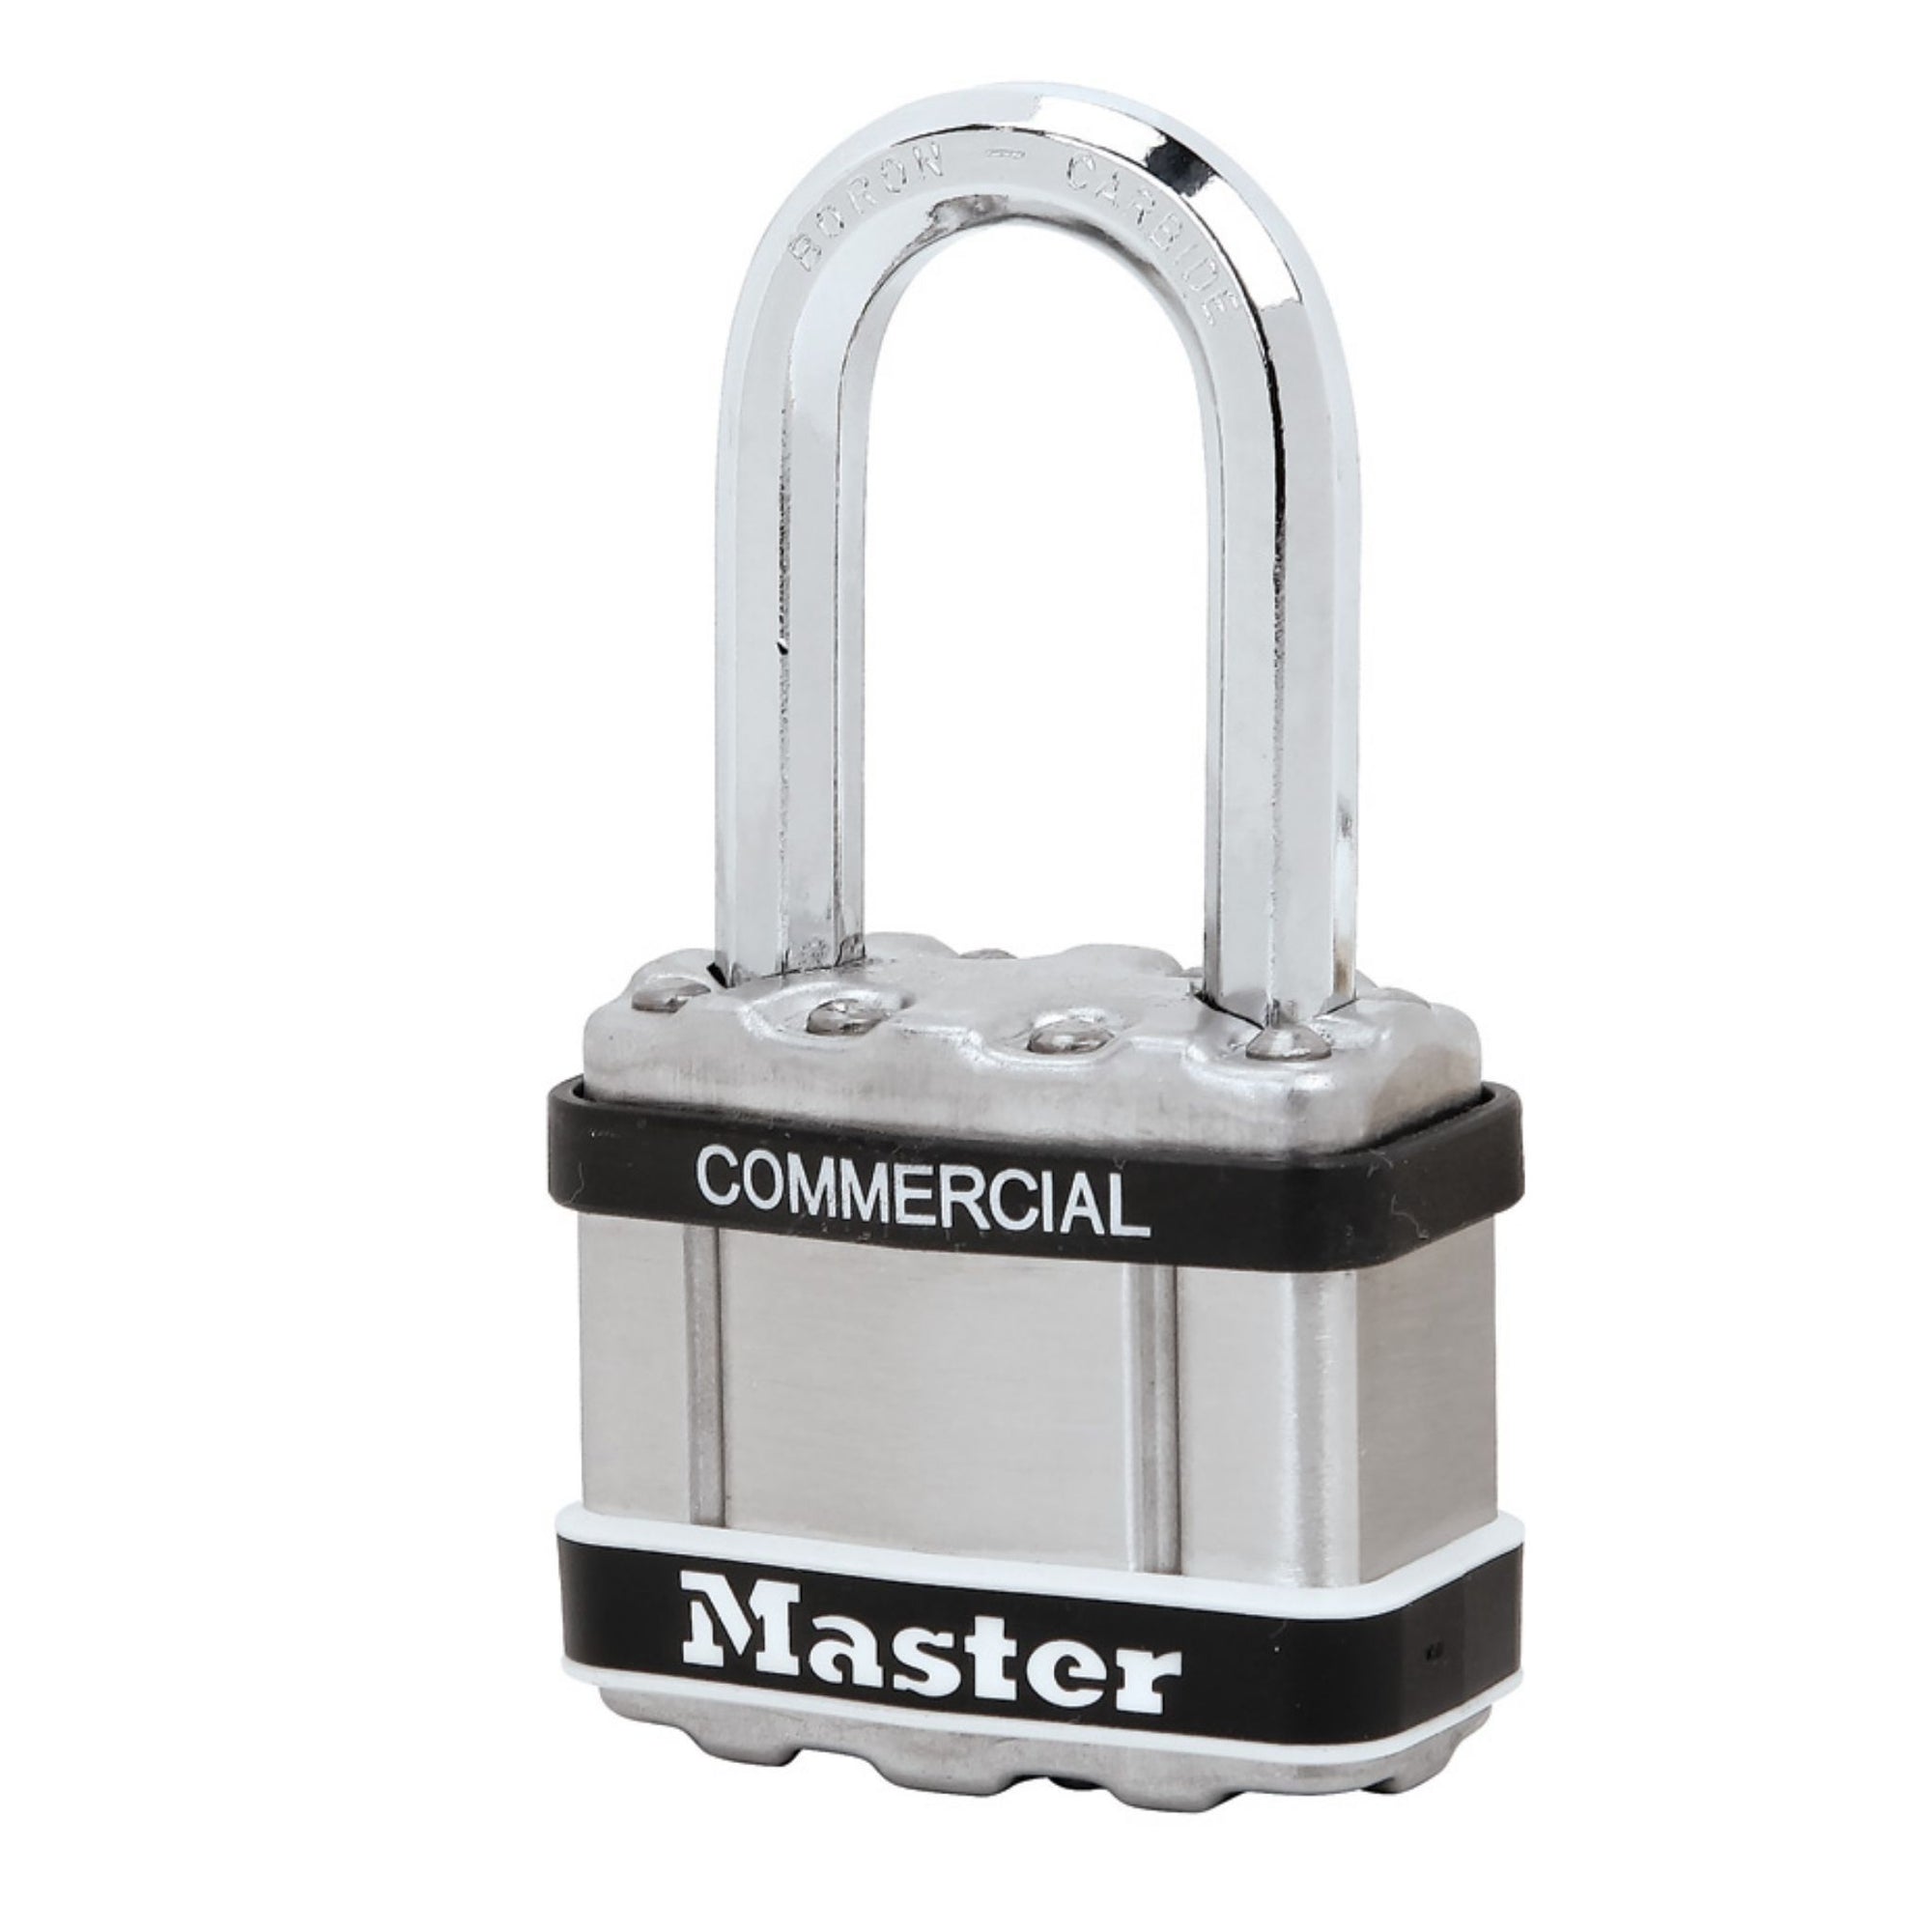 Master Lock M1 STS LF Commercial Magnum Padlock with 1-1/2" Shackle - The Lock Source